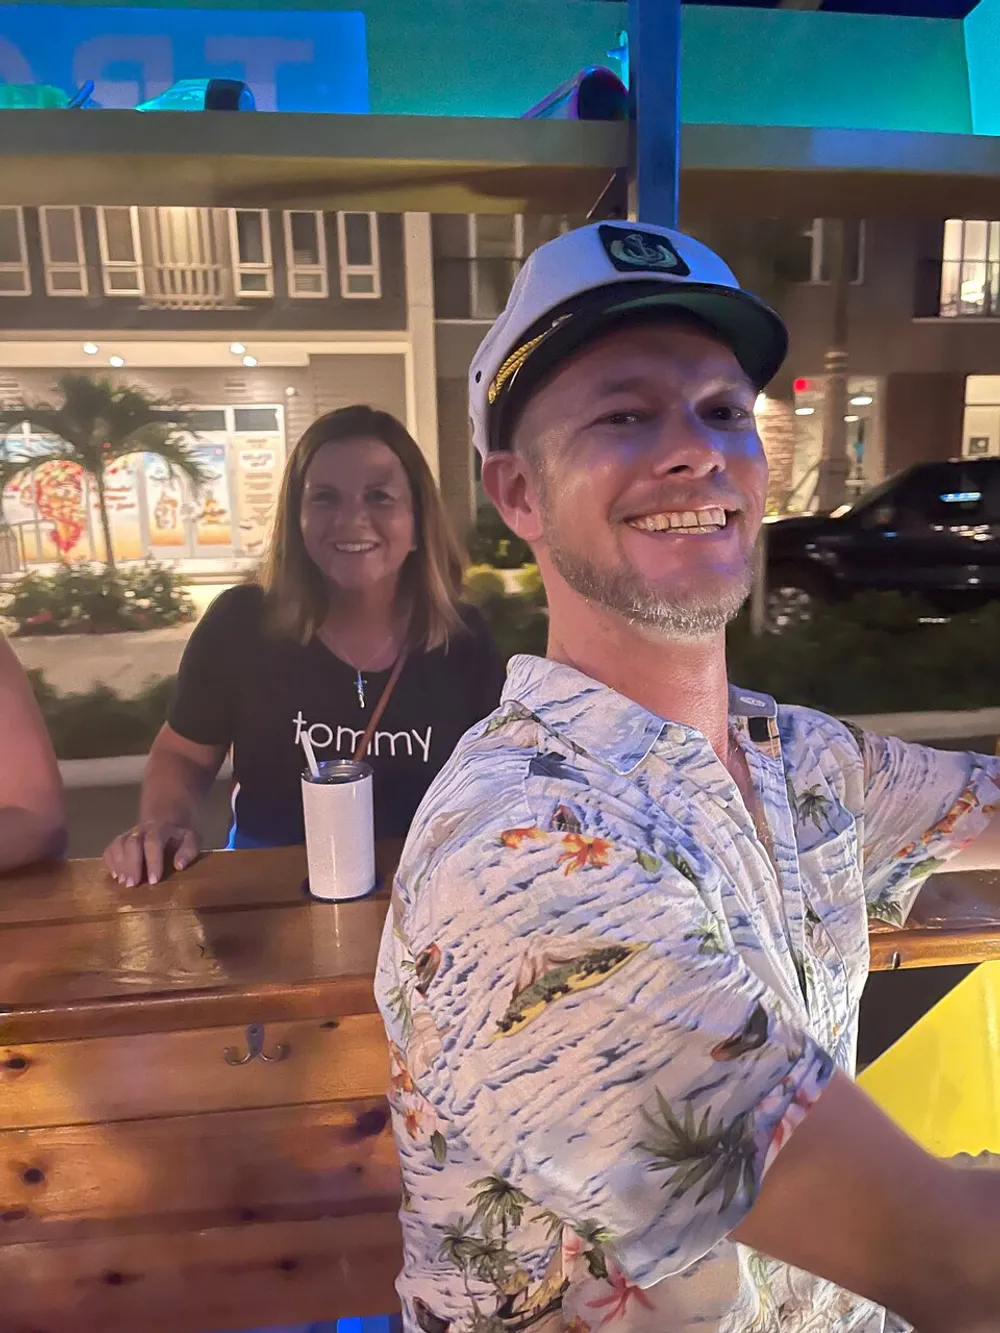 A man wearing a captains hat and a tropical shirt smiles for the camera at a nighttime social gathering while a woman stands in the background